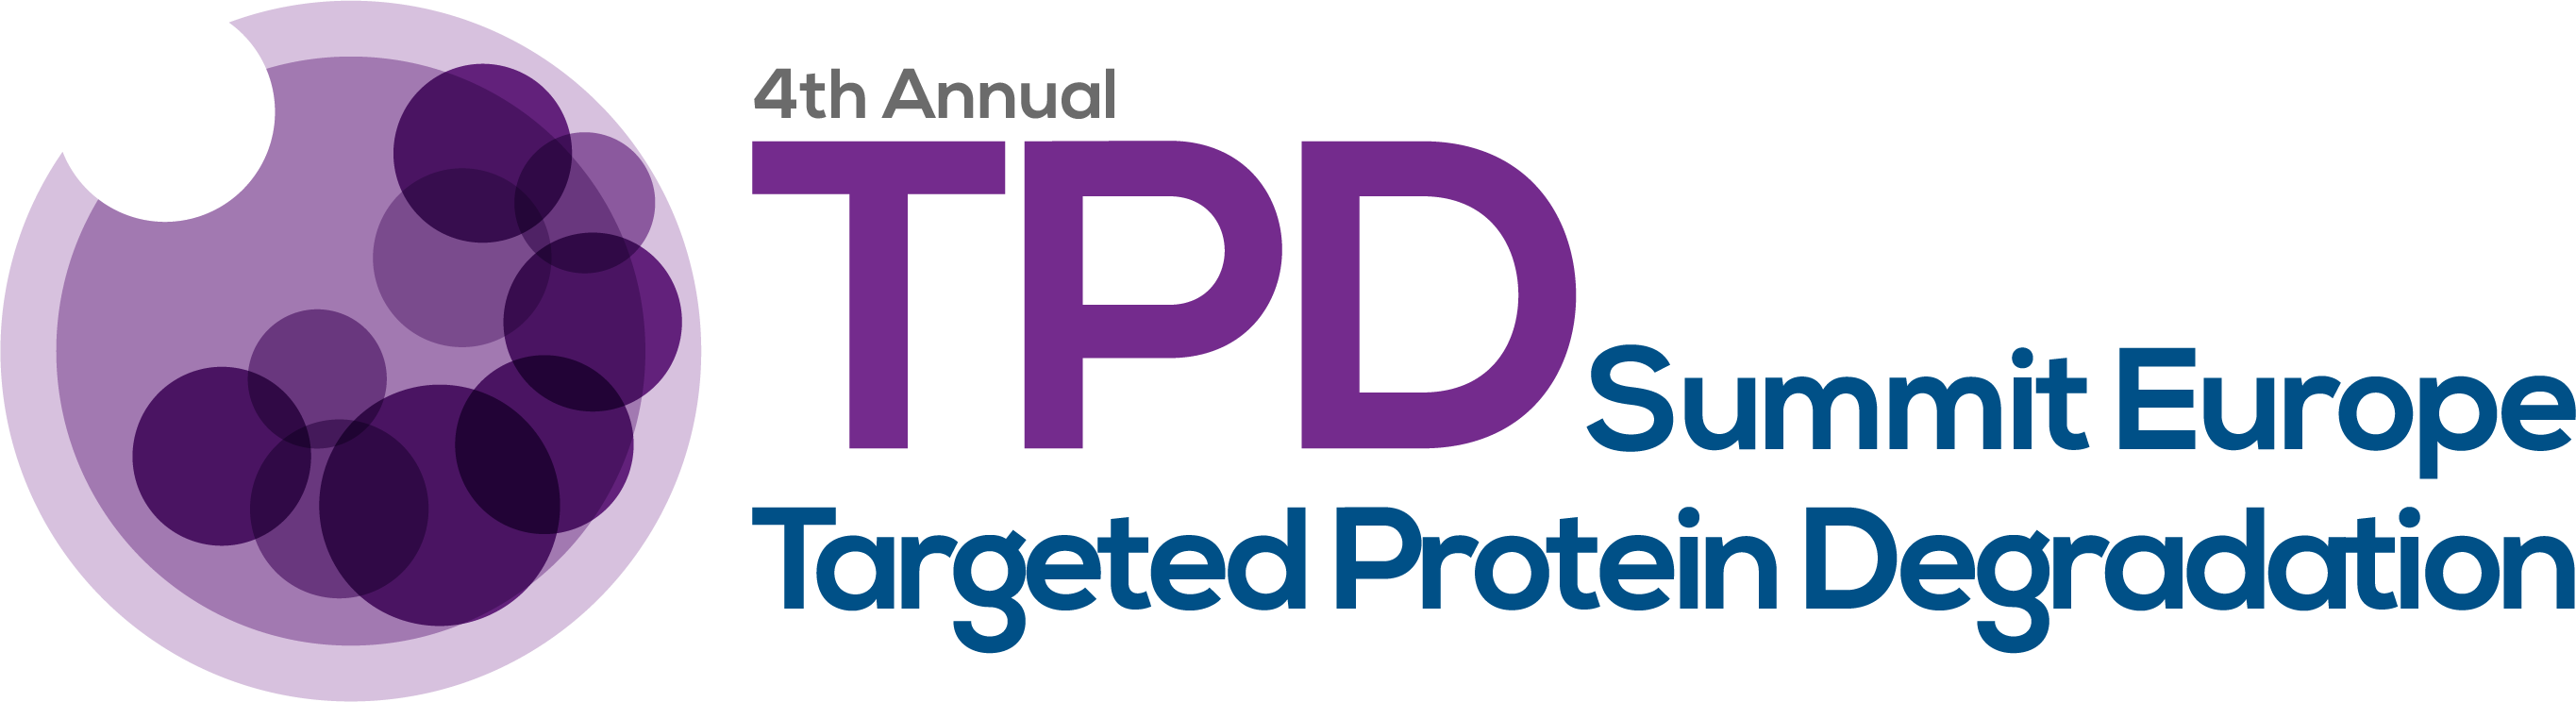 TPD Targeted Protein Degredation Summit Europe